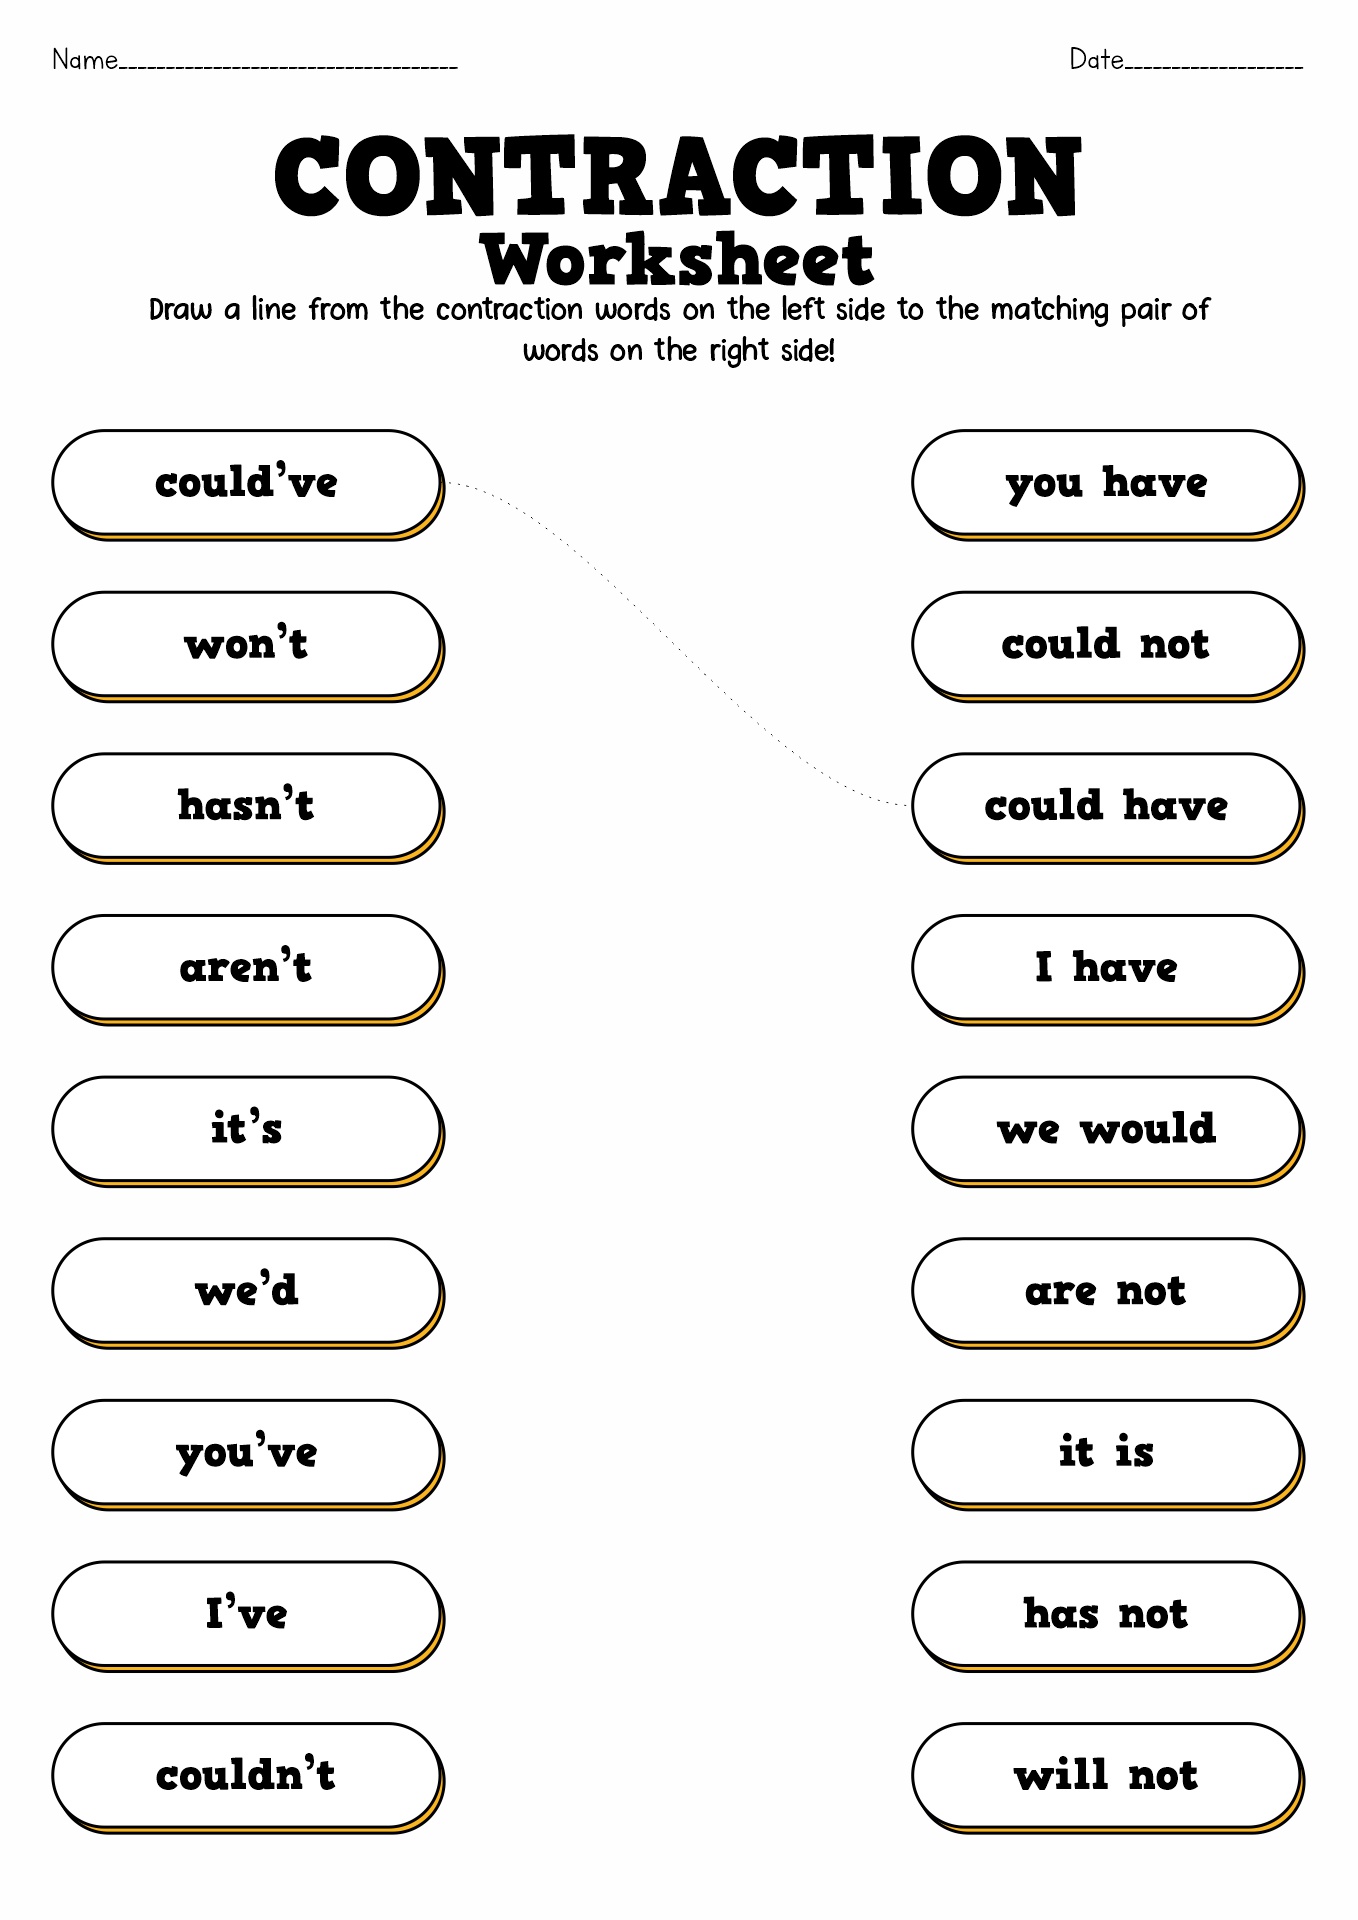 Contraction Worksheets 1st Grade Image